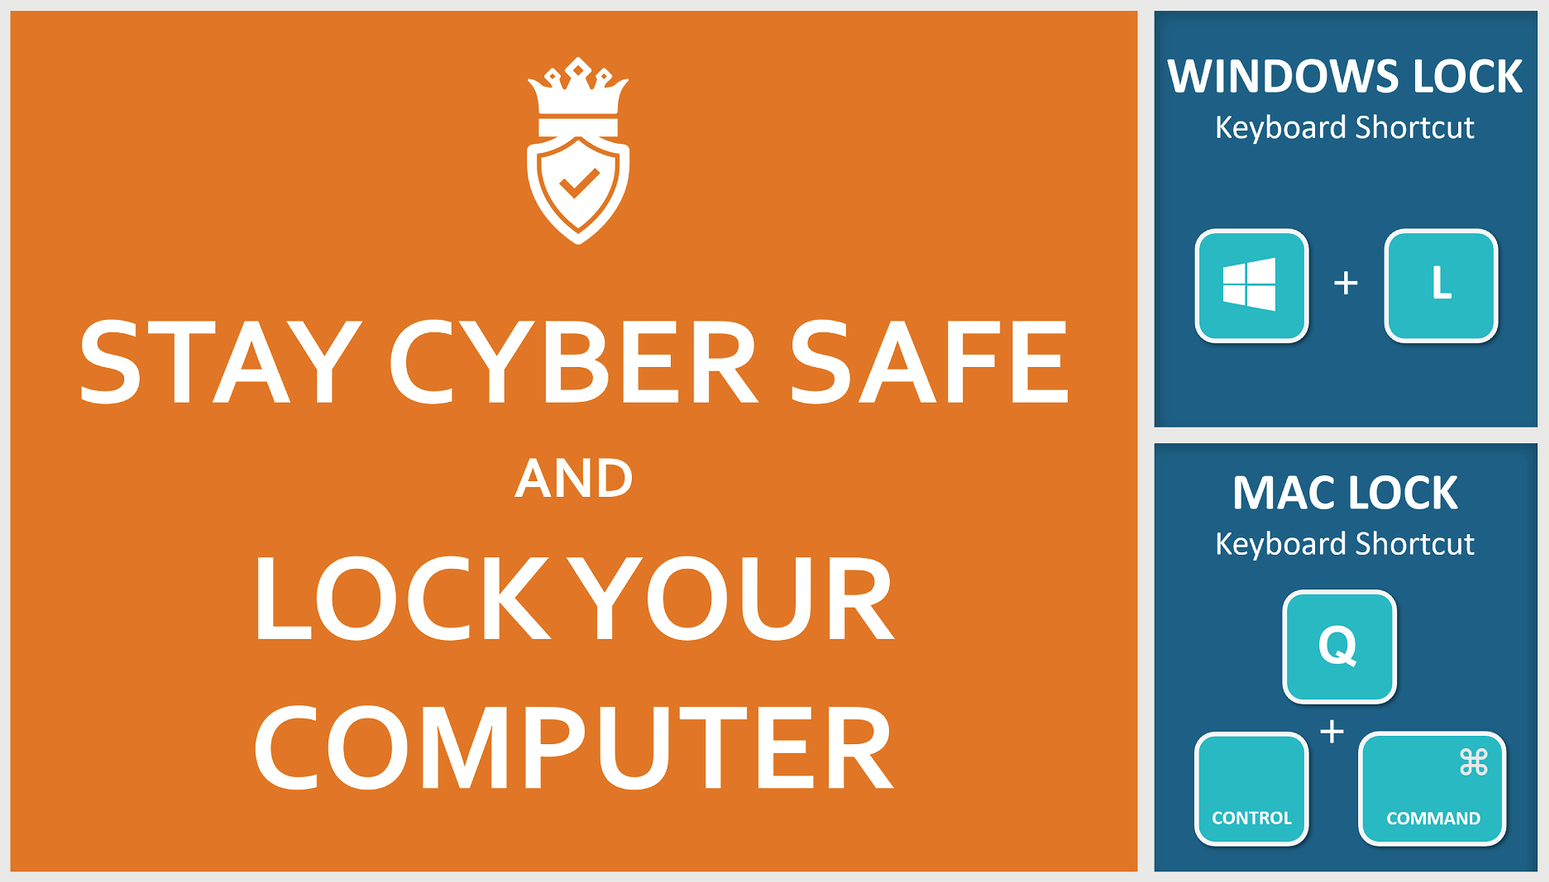 Stay cyber safe and lock your computer image with windows and mac lock shortcut keys.